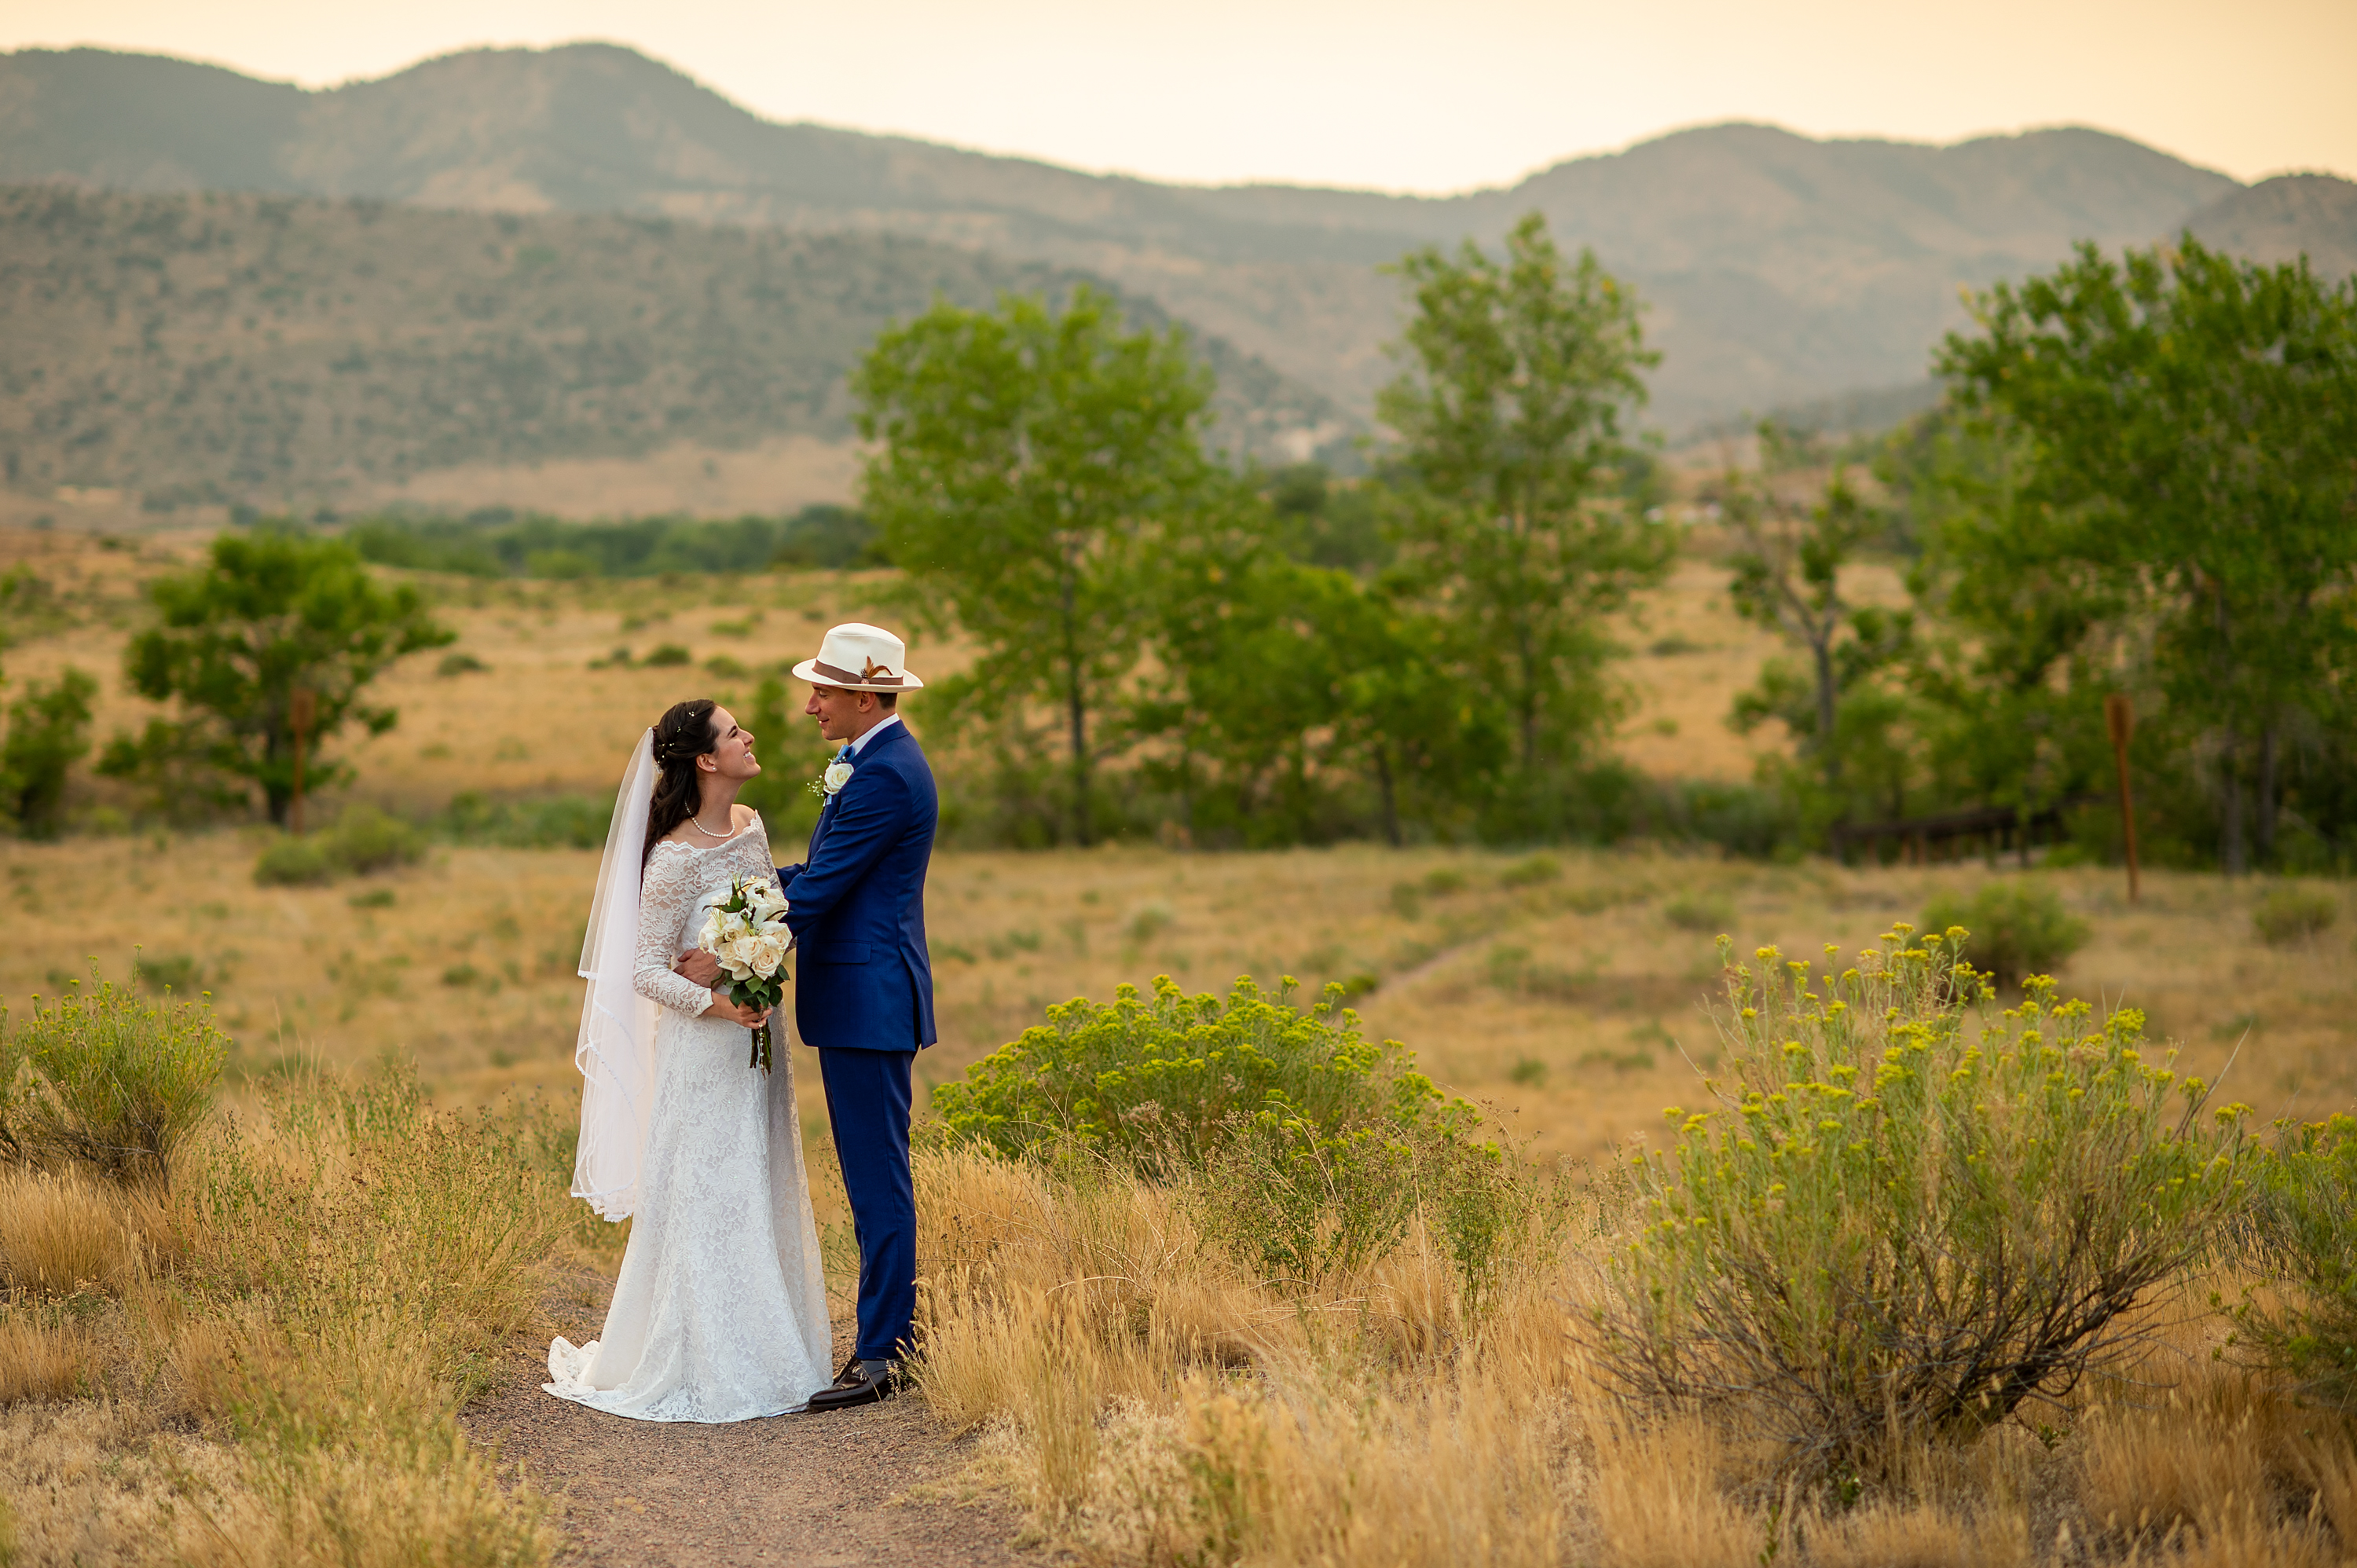 Bride and groom pose during their wedding portrait session at Bear Creek Lake Park in Lakewood, Colorado.